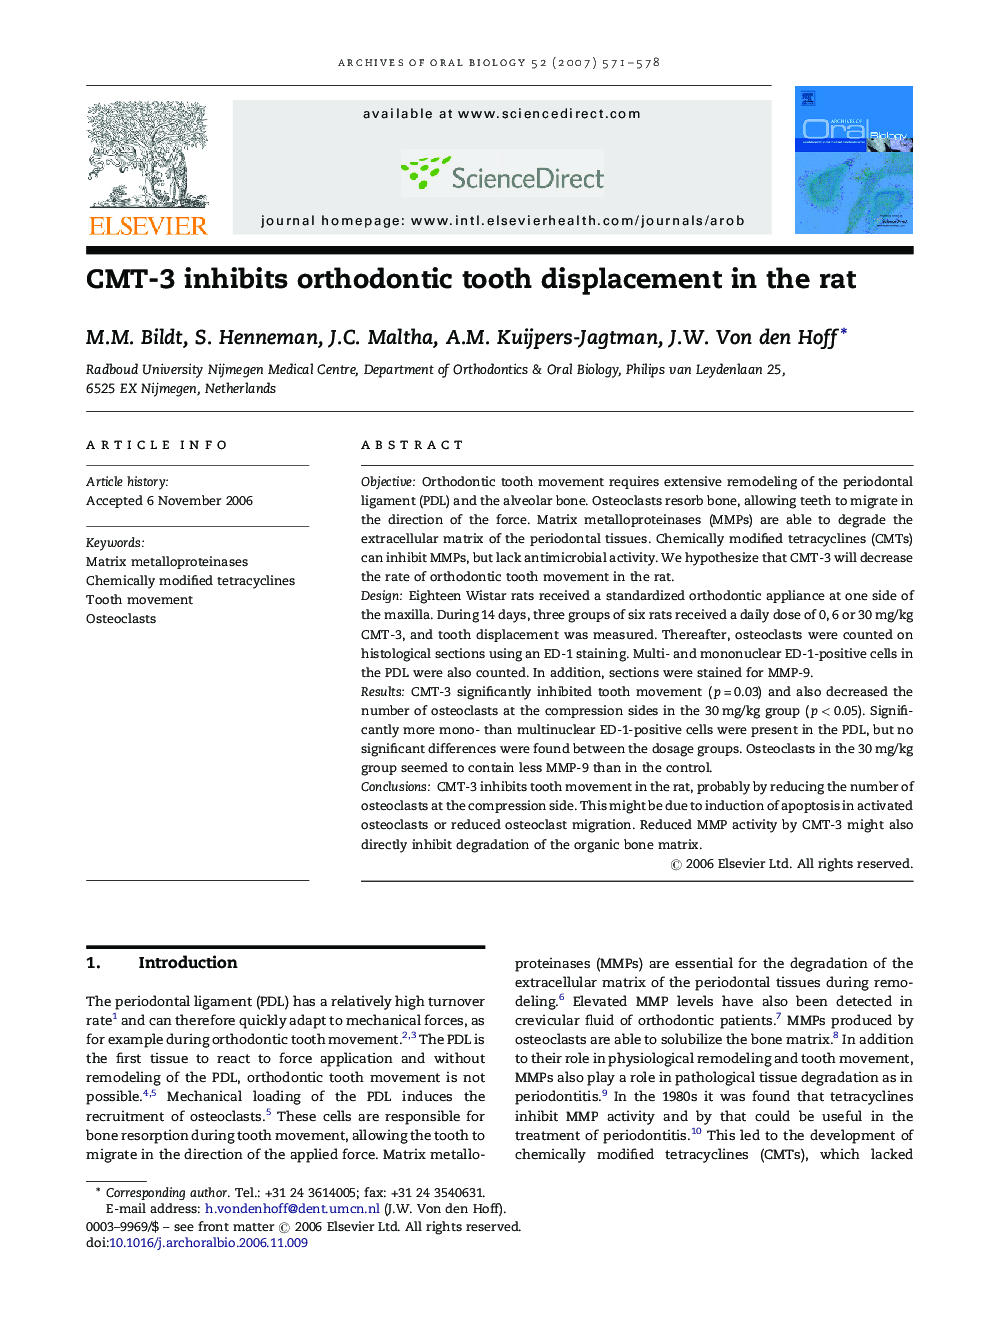 CMT-3 inhibits orthodontic tooth displacement in the rat